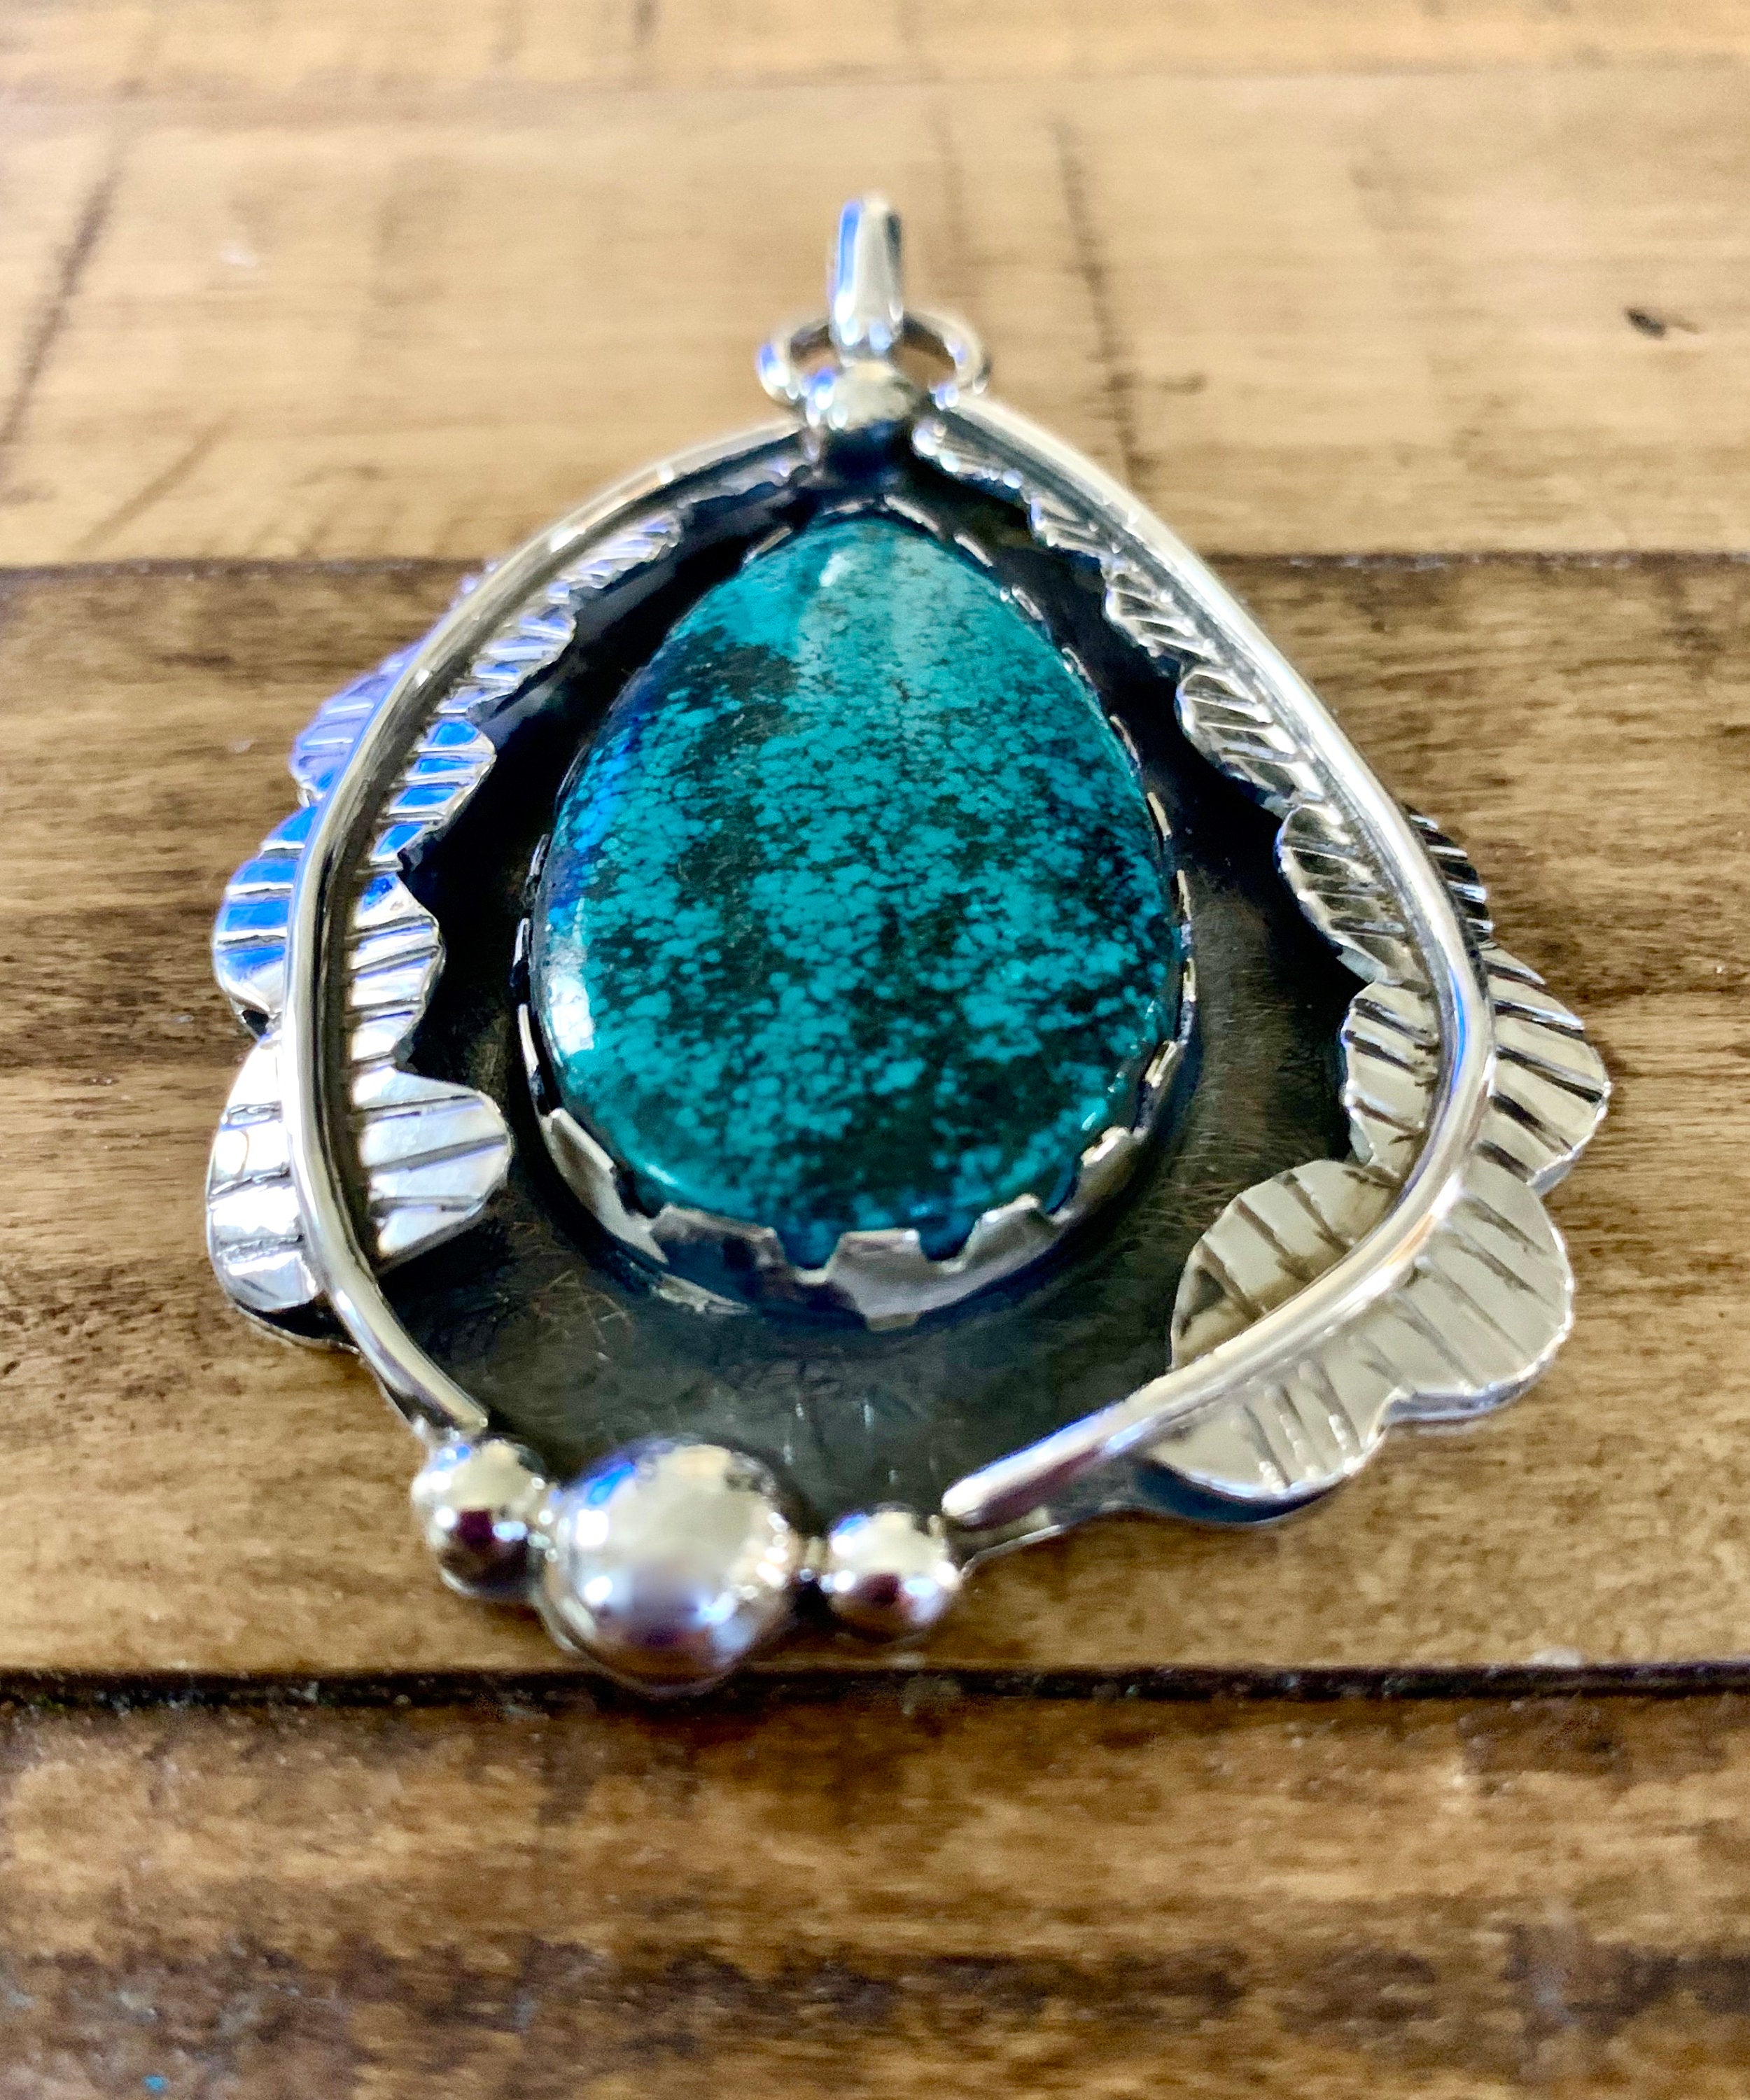 Muheeka Sterling Silver TEARDROP TURQUOISE PENDANT, Blue Green Turquoise with Feather Motifs and Flower, Handmade by Bob Summers Silversmith